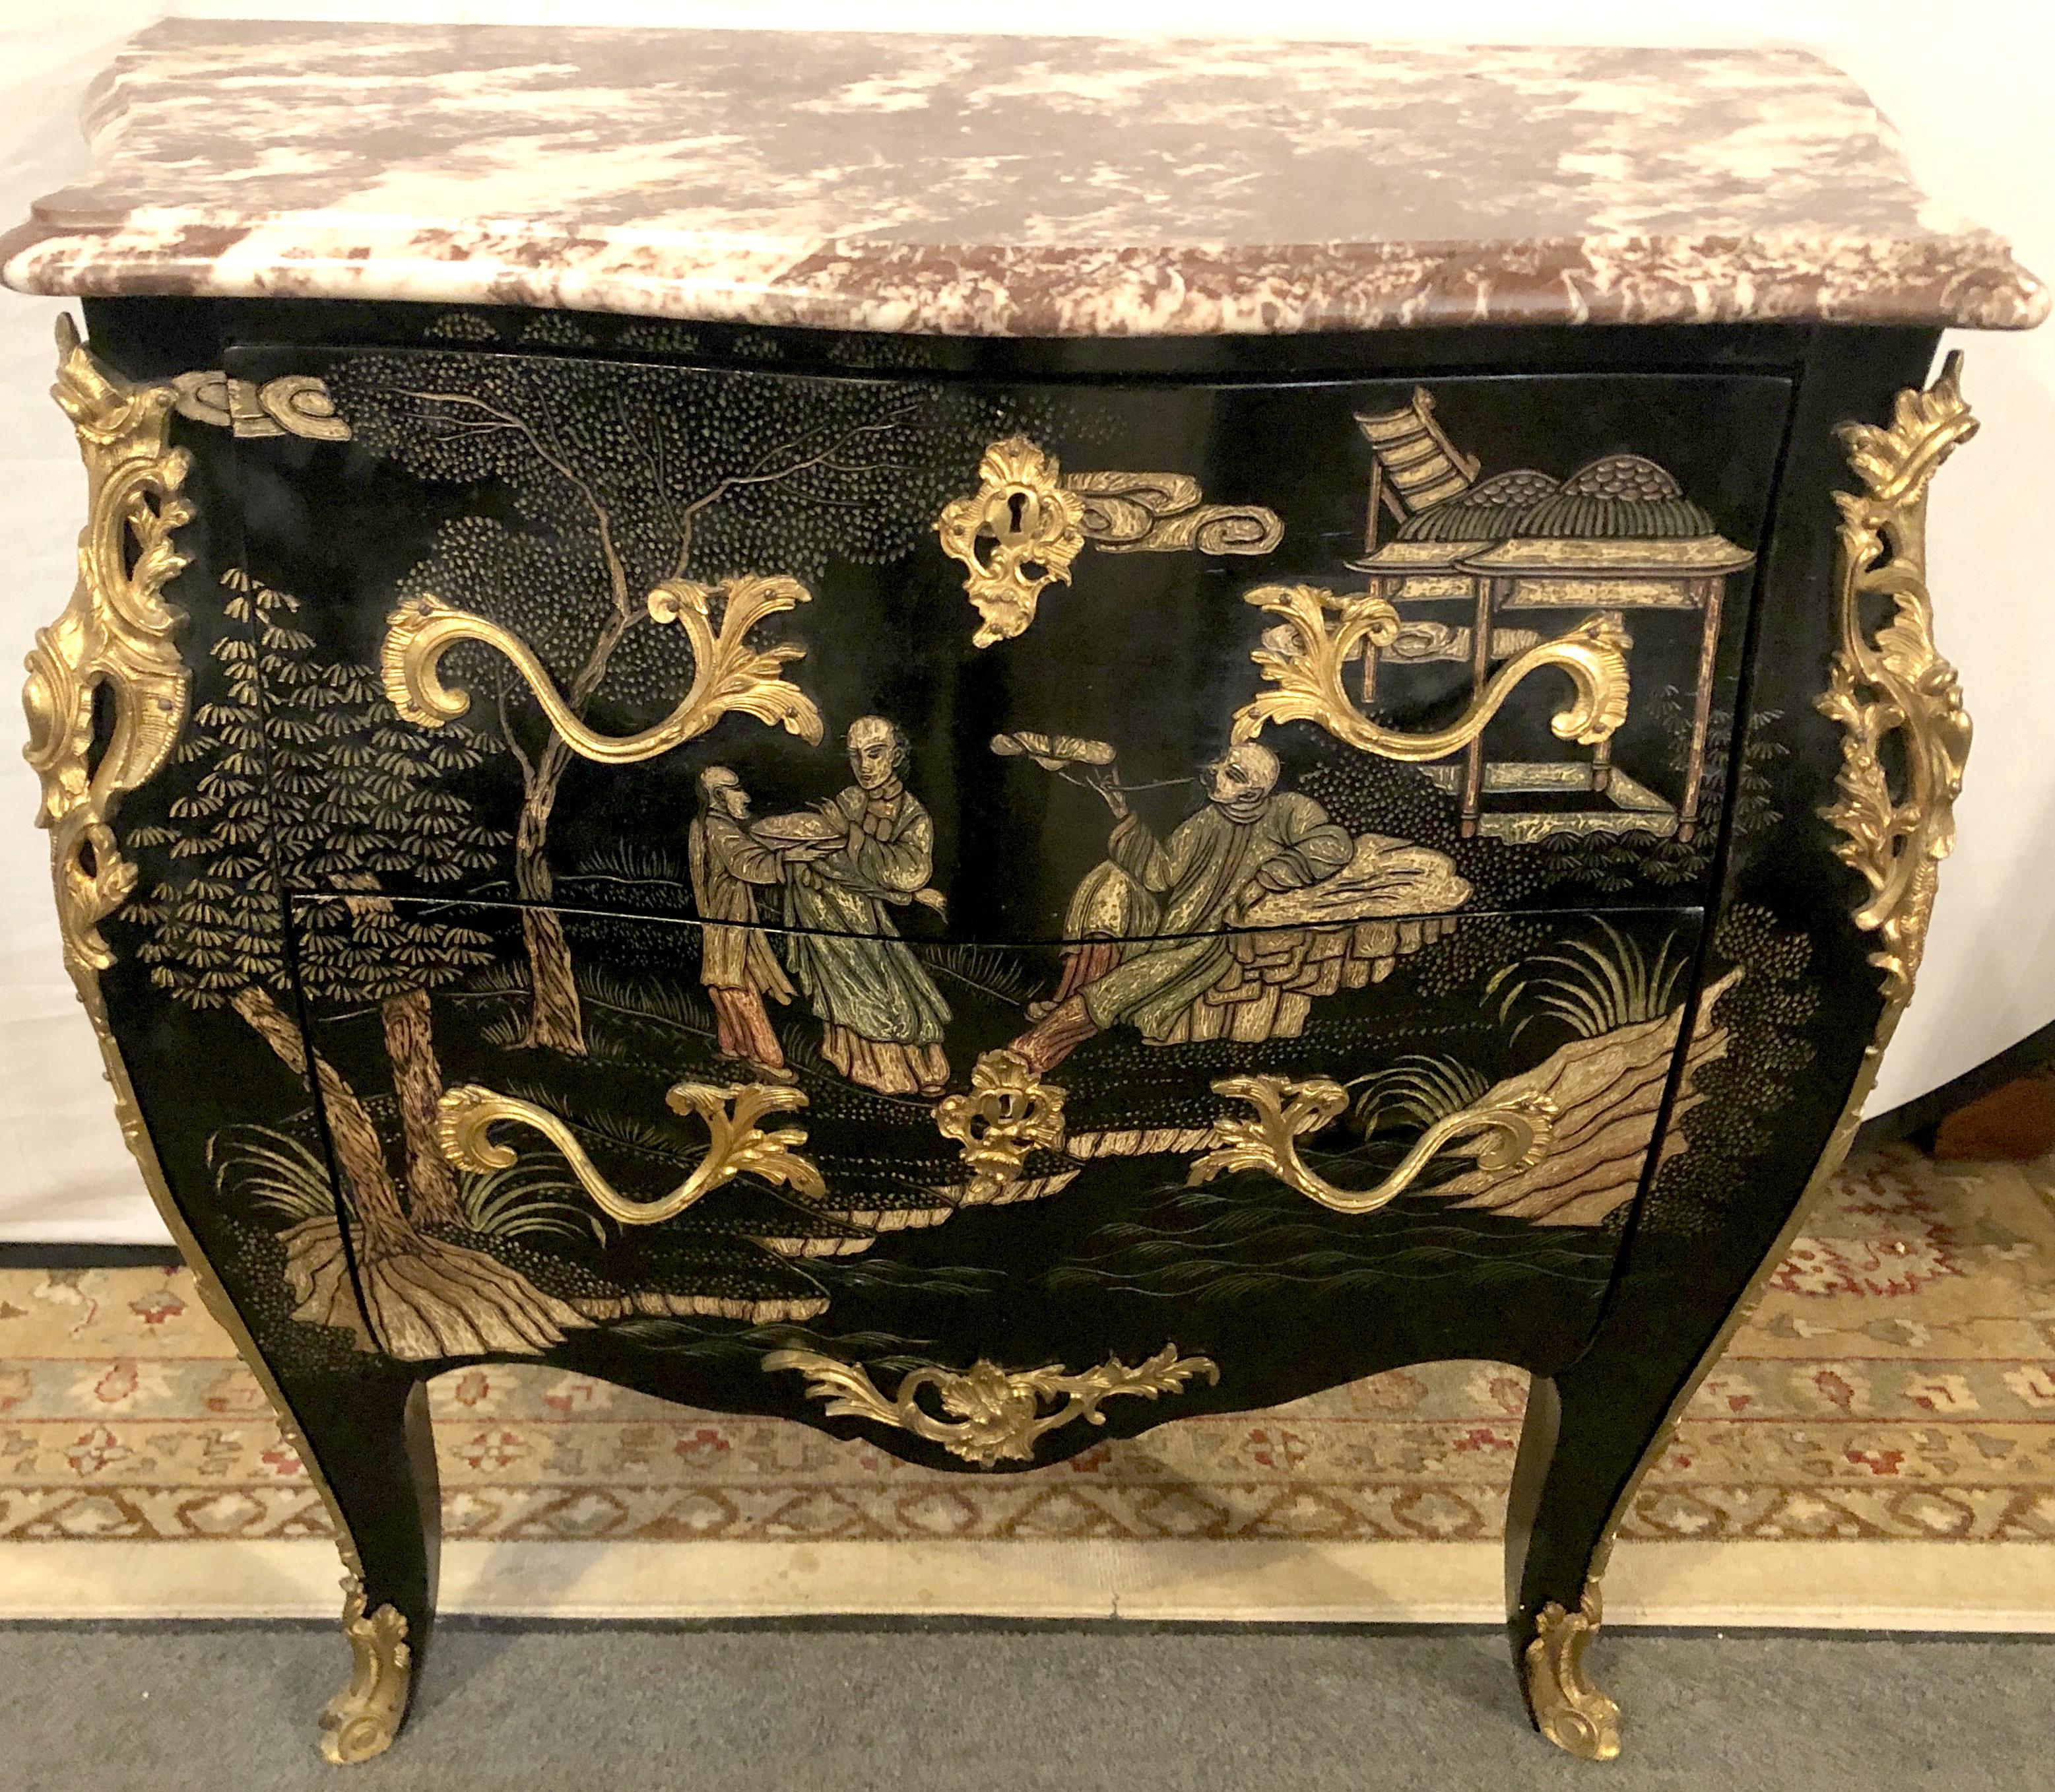 Chinese Export Antique Louis XV Style Ebonized & Bronze-Mounted Chinoiserie Marble-Top Commode